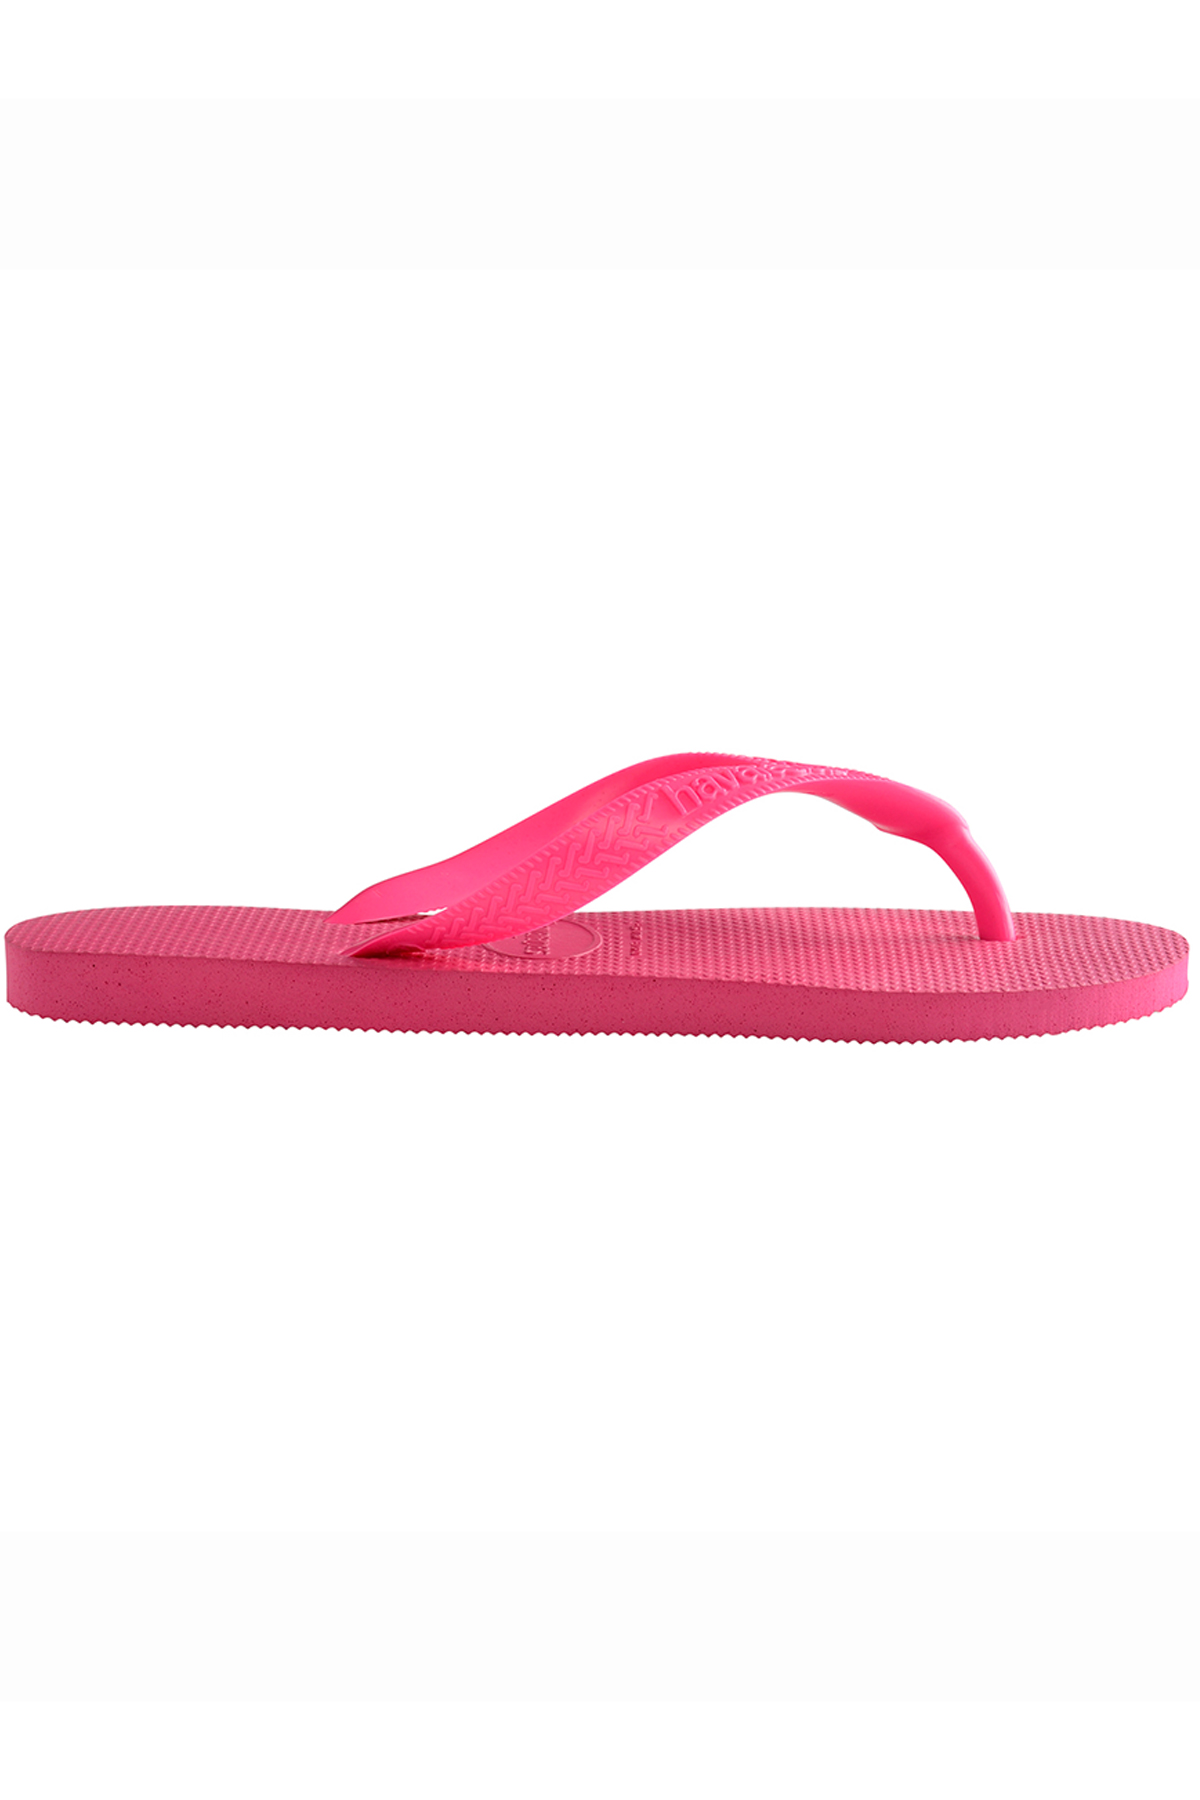 Havaianas Unisex Slippers - Pink Electric